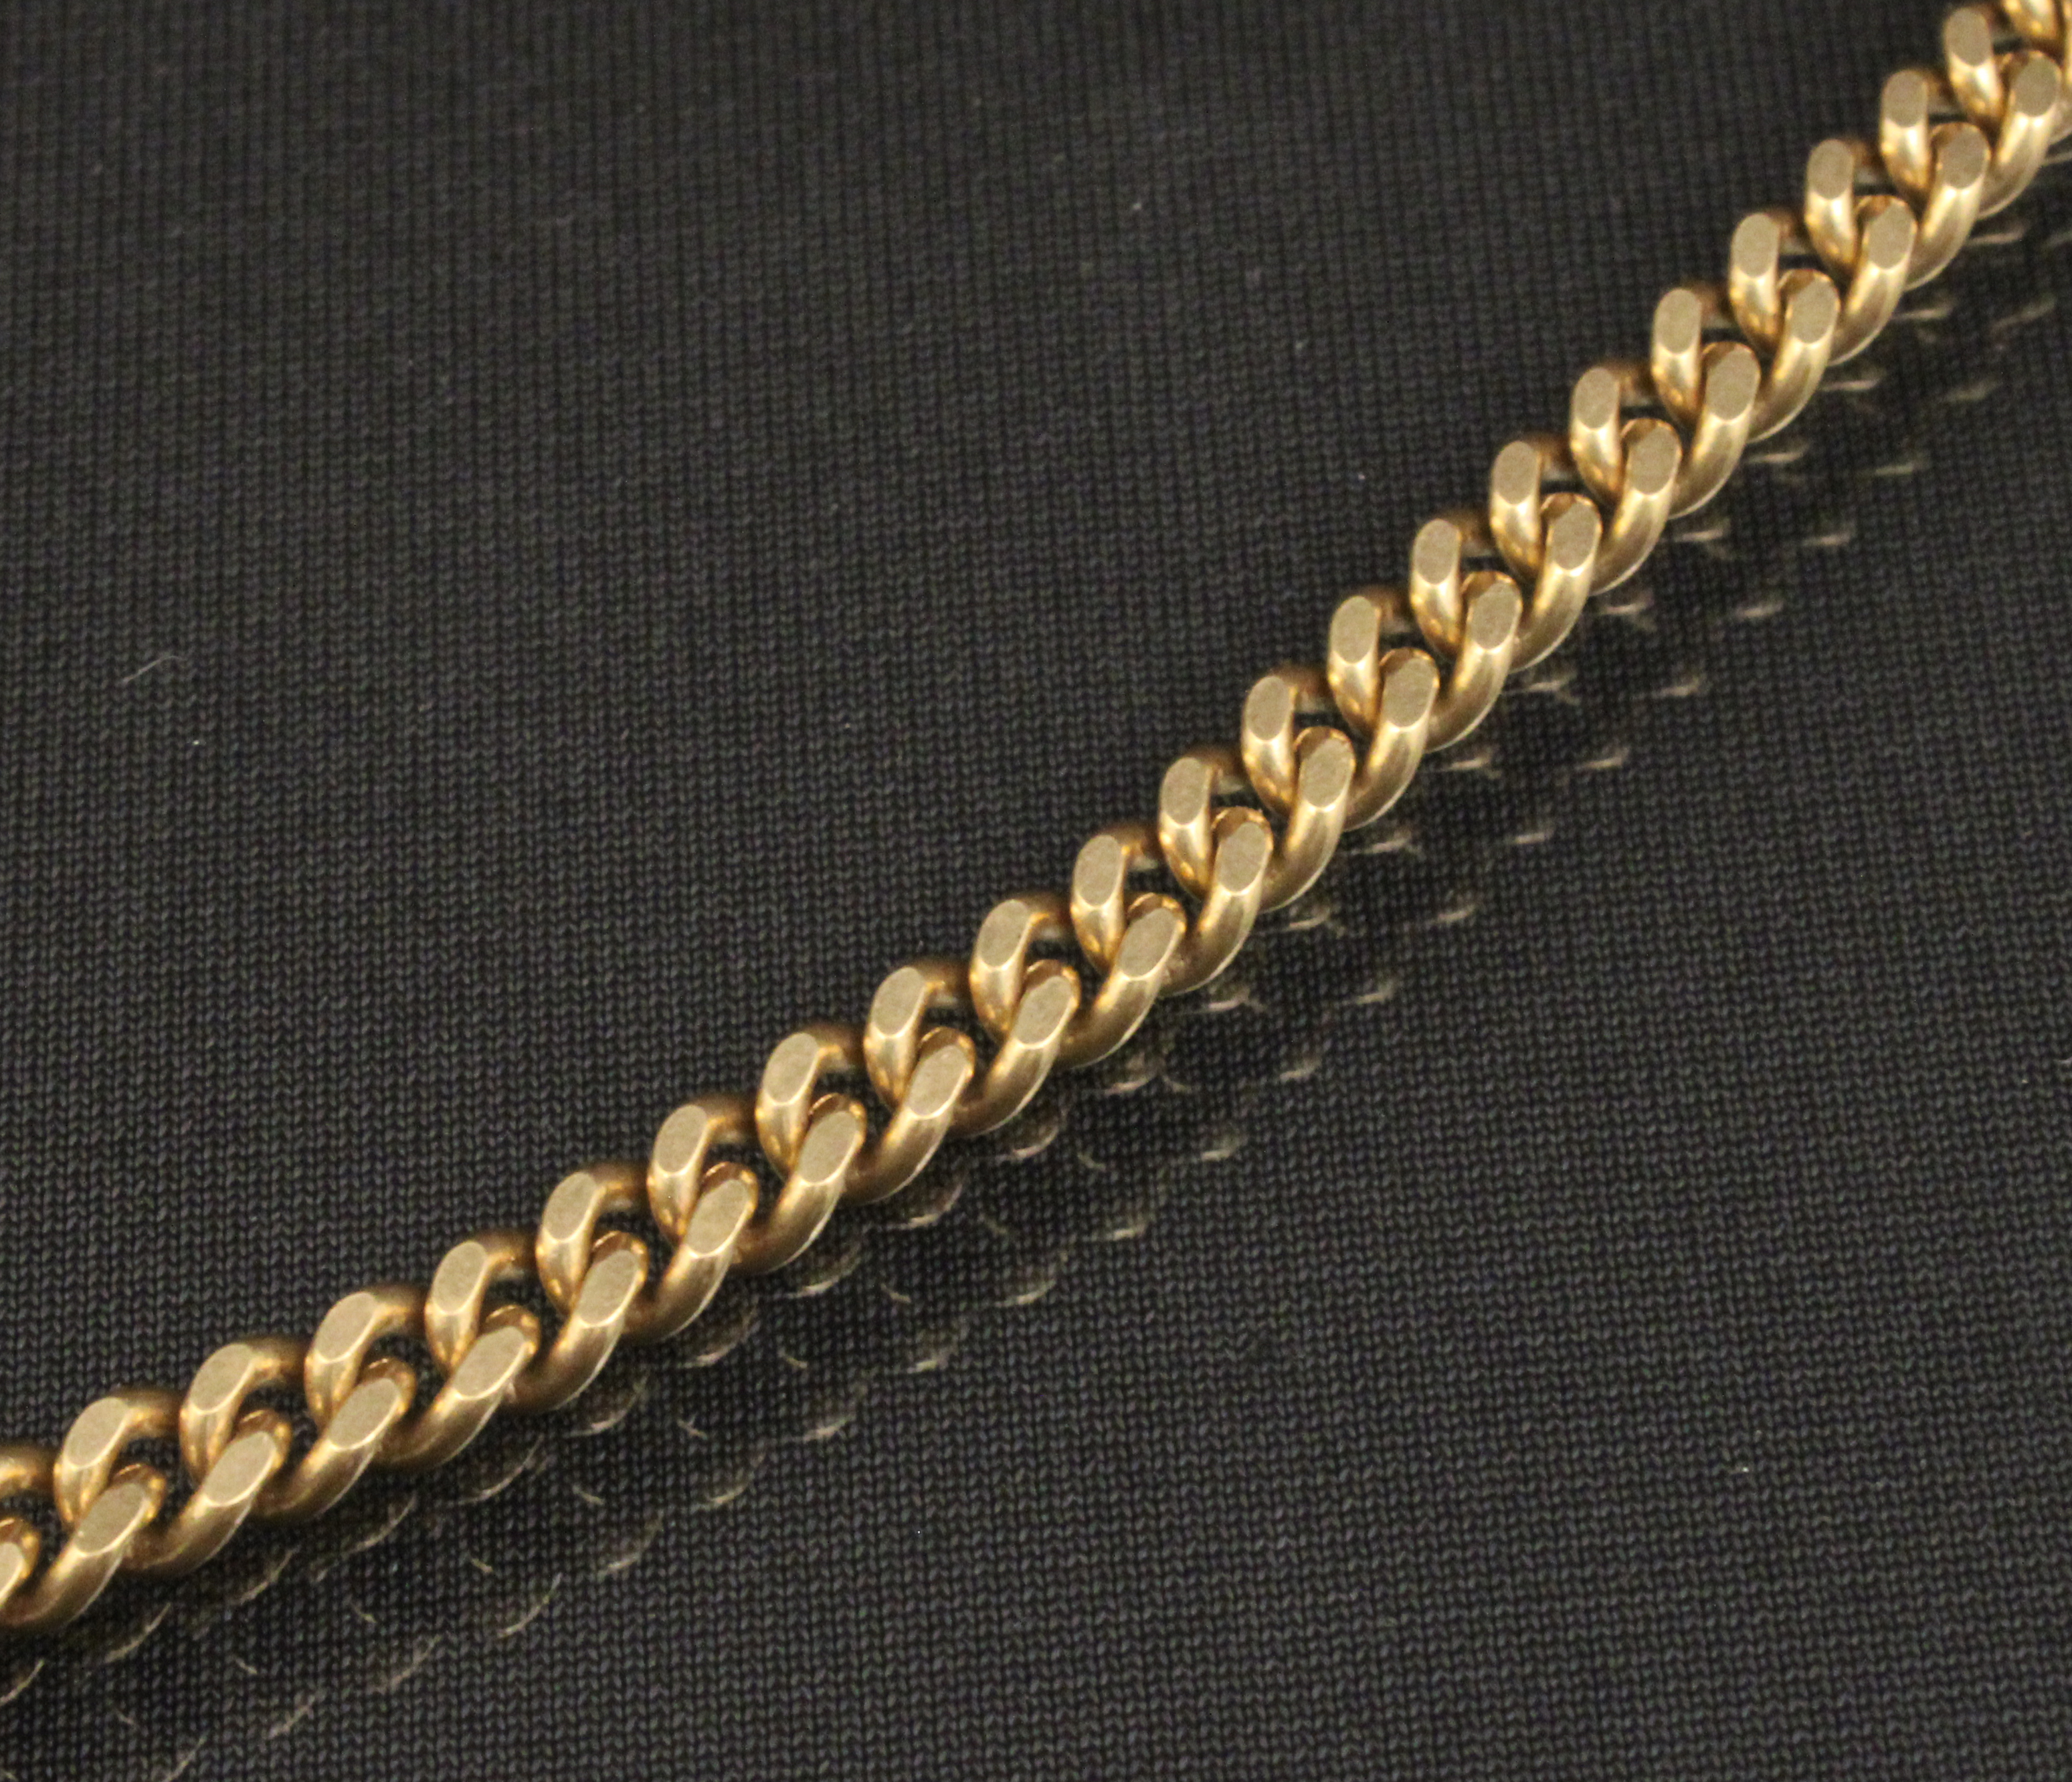 18K YELLOW GOLD CHAIN 35" NECKLACE;